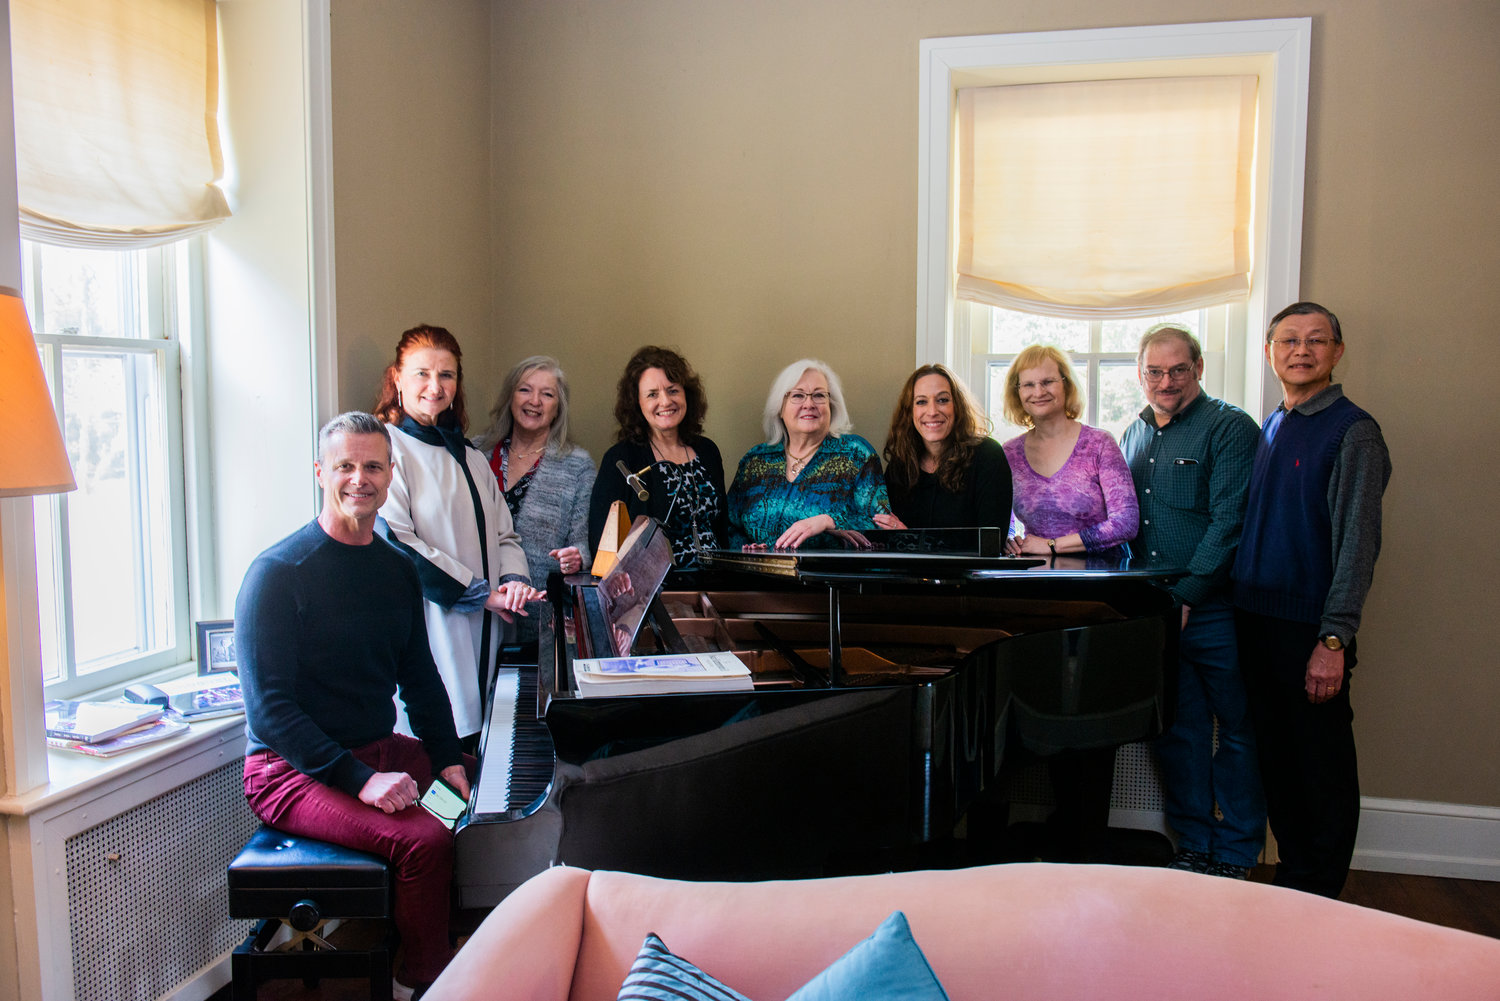 Members of the Philly Pops gather around the grand piano at Highland Farm.